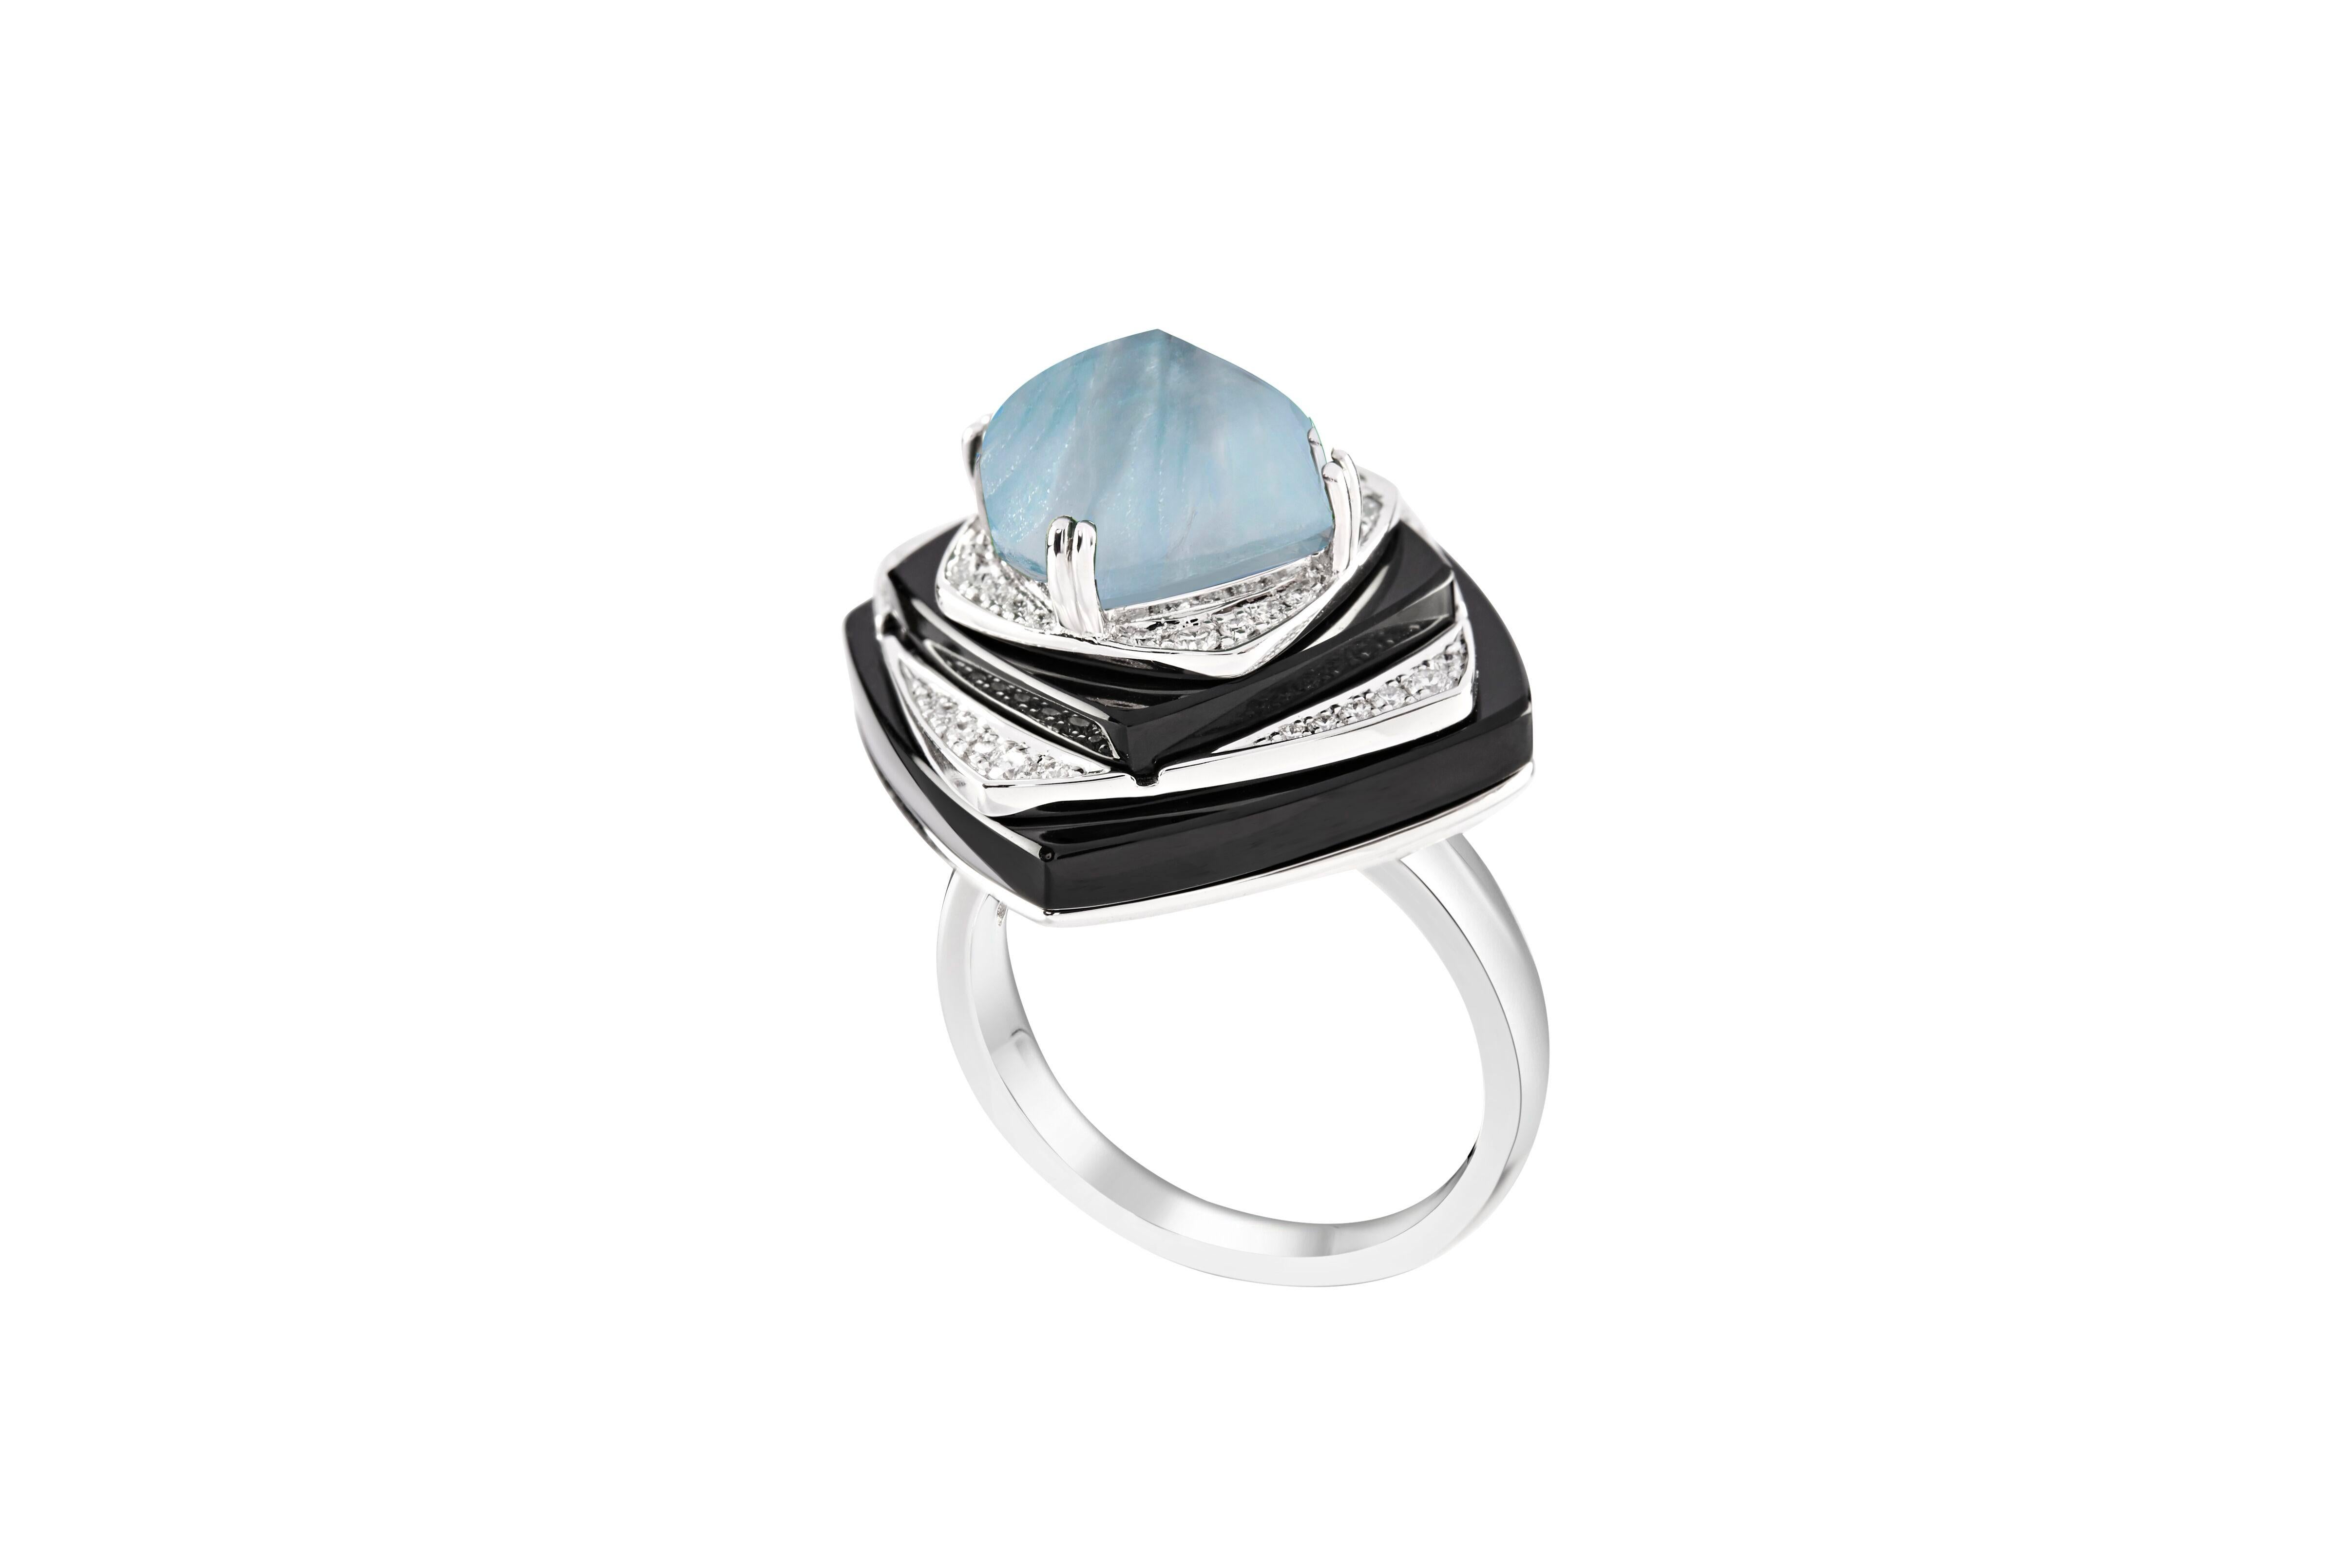 Ananya Nazar Ring set with Aquamarine, Onyx and Diamonds
Set in 18K White gold

Total diamond weight: 0.23 ct
Color: F-G
Clarity: VVS1

Total aquamarine weight: 3.68 ct

Total black onyx weight: 16.29 ct

Diameter - 17mm